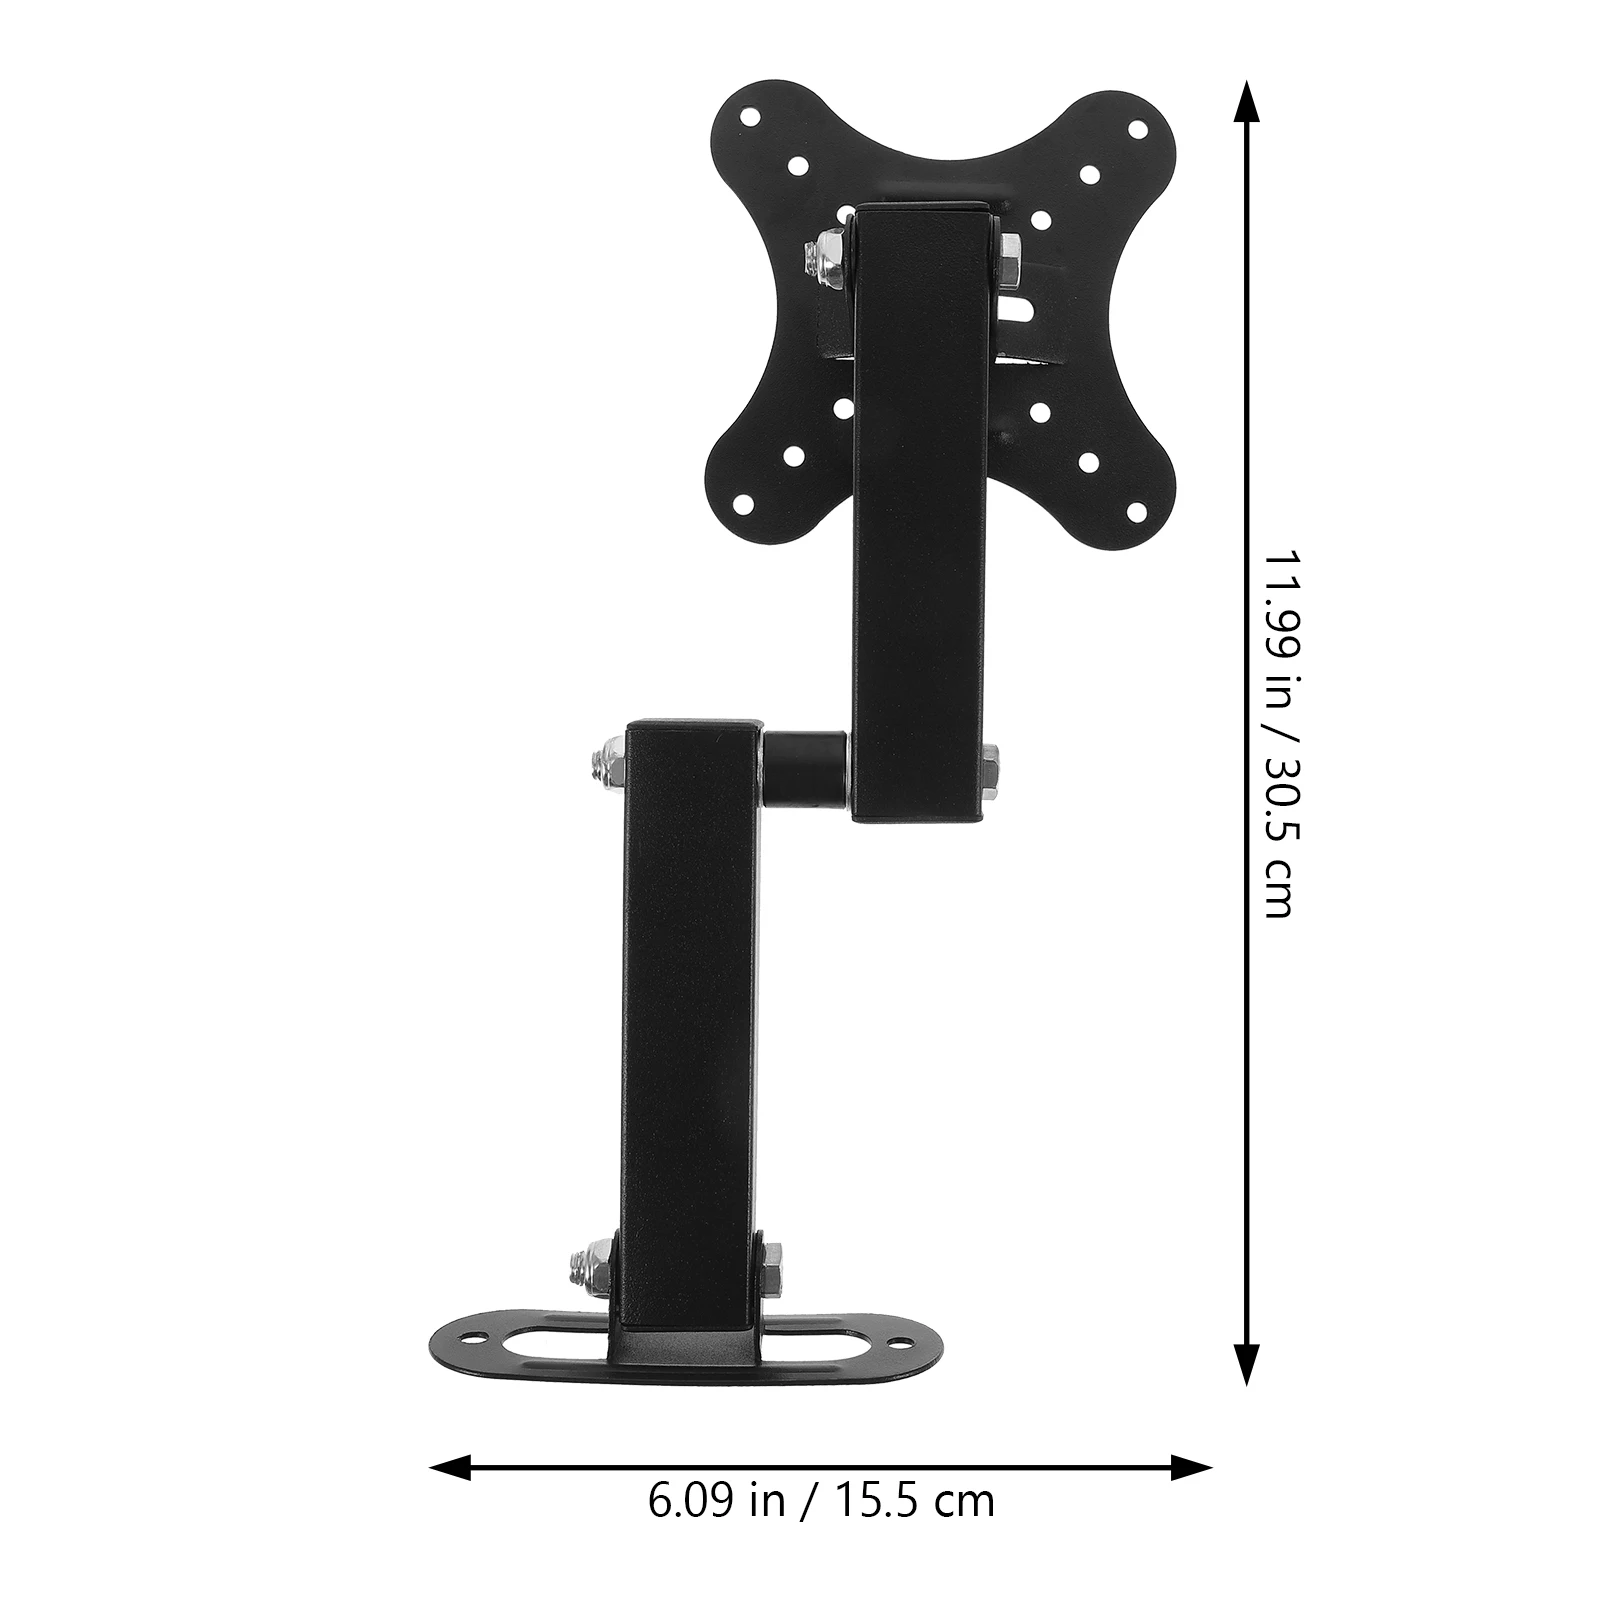 Universal Retractable TV Mounts Wall Mount Bracket Load Bearing For 14 to 24 inches LCD Monitor TV Stand Expansion Bracket